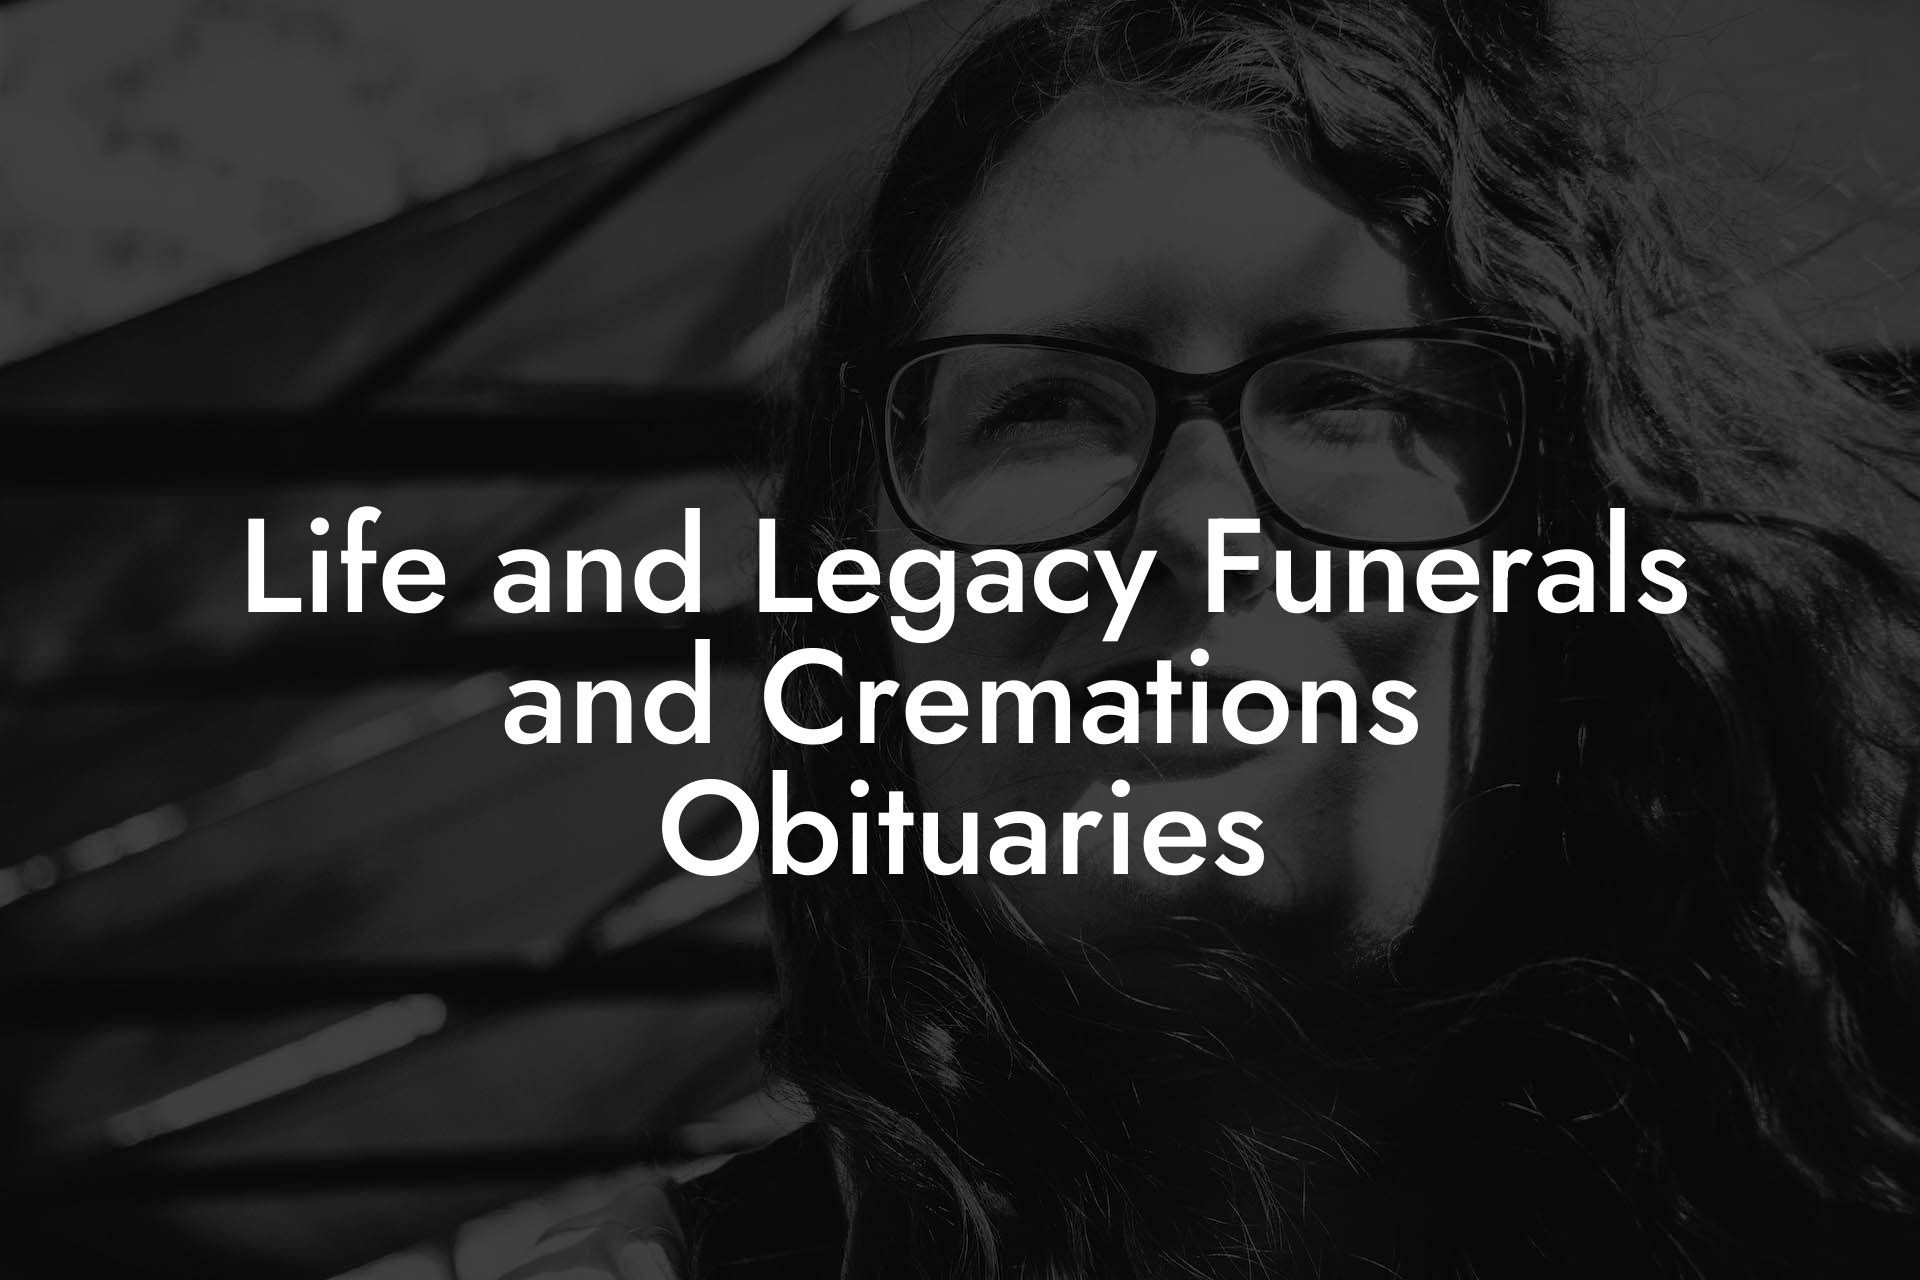 Life and Legacy Funerals and Cremations Obituaries